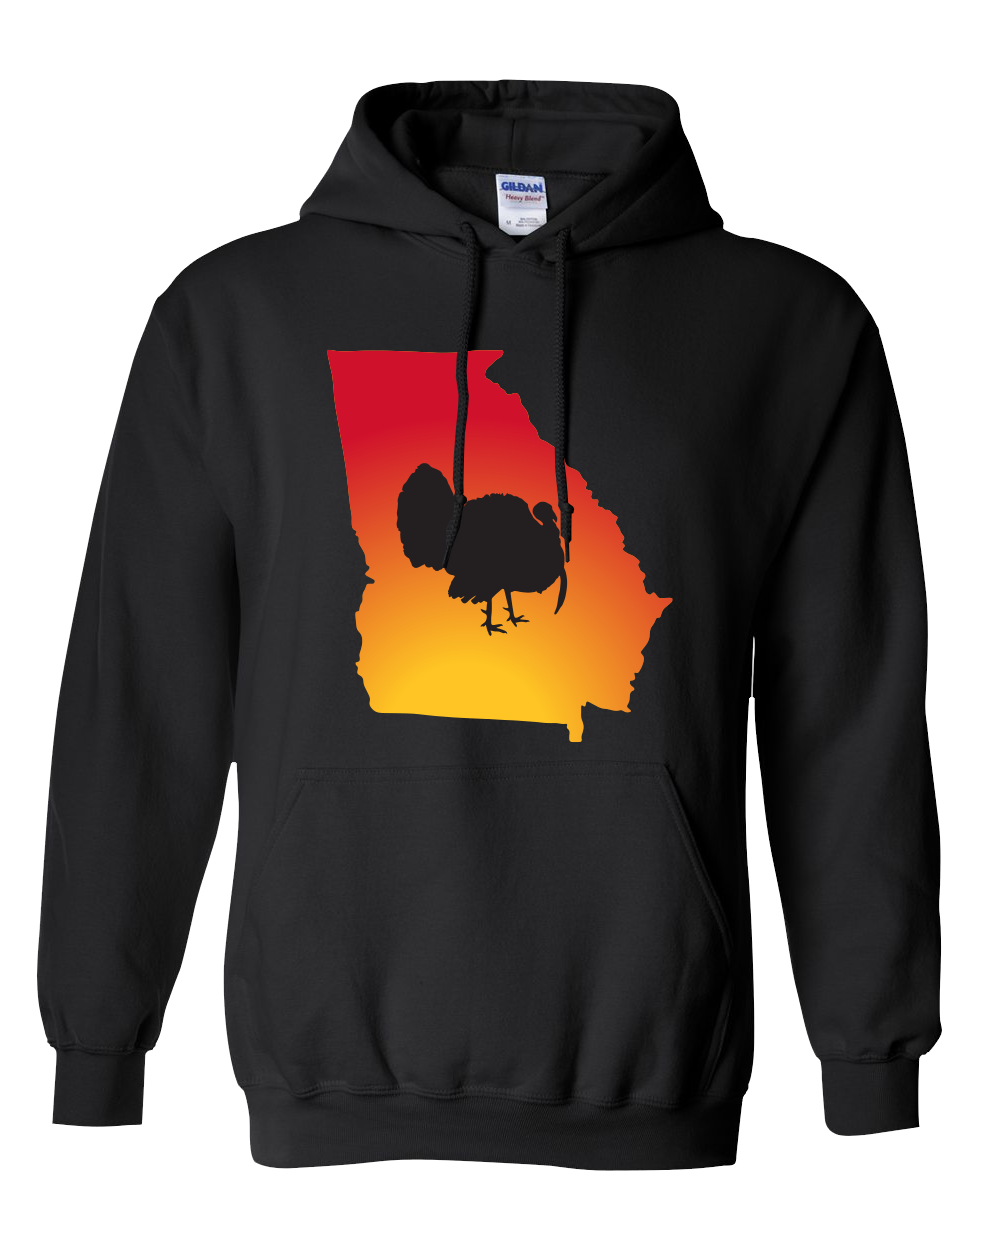 Pullover Hooded Sweatshirt Georgia Black Turkey Vibrant Design High Quality Tight Knit Ring Spun Low Maintenance Cotton Printed With The Newest Available Color Transfer Technology